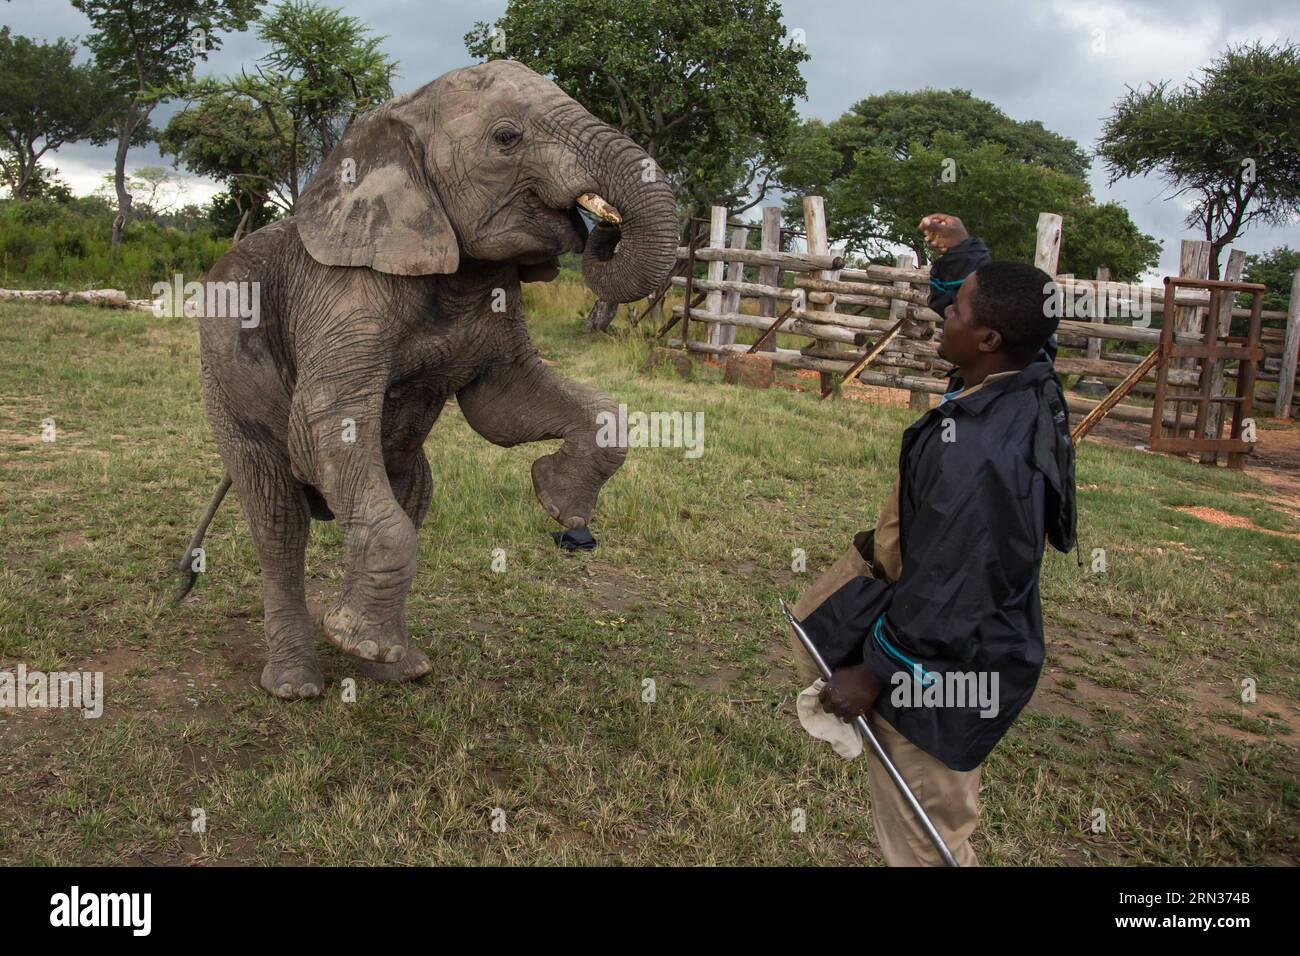 HARARE, April 7, 2015 -- Baby elephant Mamba tries to stand on its rear legs during an elephant interaction program at a game park in Selous, 70 km from Harare, capital of Zimbabwe, on April 7, 2015. Home to around 80,000 to 100,000 elephants, Zimbabwe is considered one of the world s prime elephant sanctuaries. Animal rights groups propose developing eco-tourism which generate tourism revenue and help reserve the wildlife at their comfort zone at the same time. ) ZIMBABWE-HARARE-TOURISM-ELEPHANTS XuxLingui PUBLICATIONxNOTxINxCHN   Harare April 7 2015 Baby Elephant Mamba tries to stand ON its Stock Photo